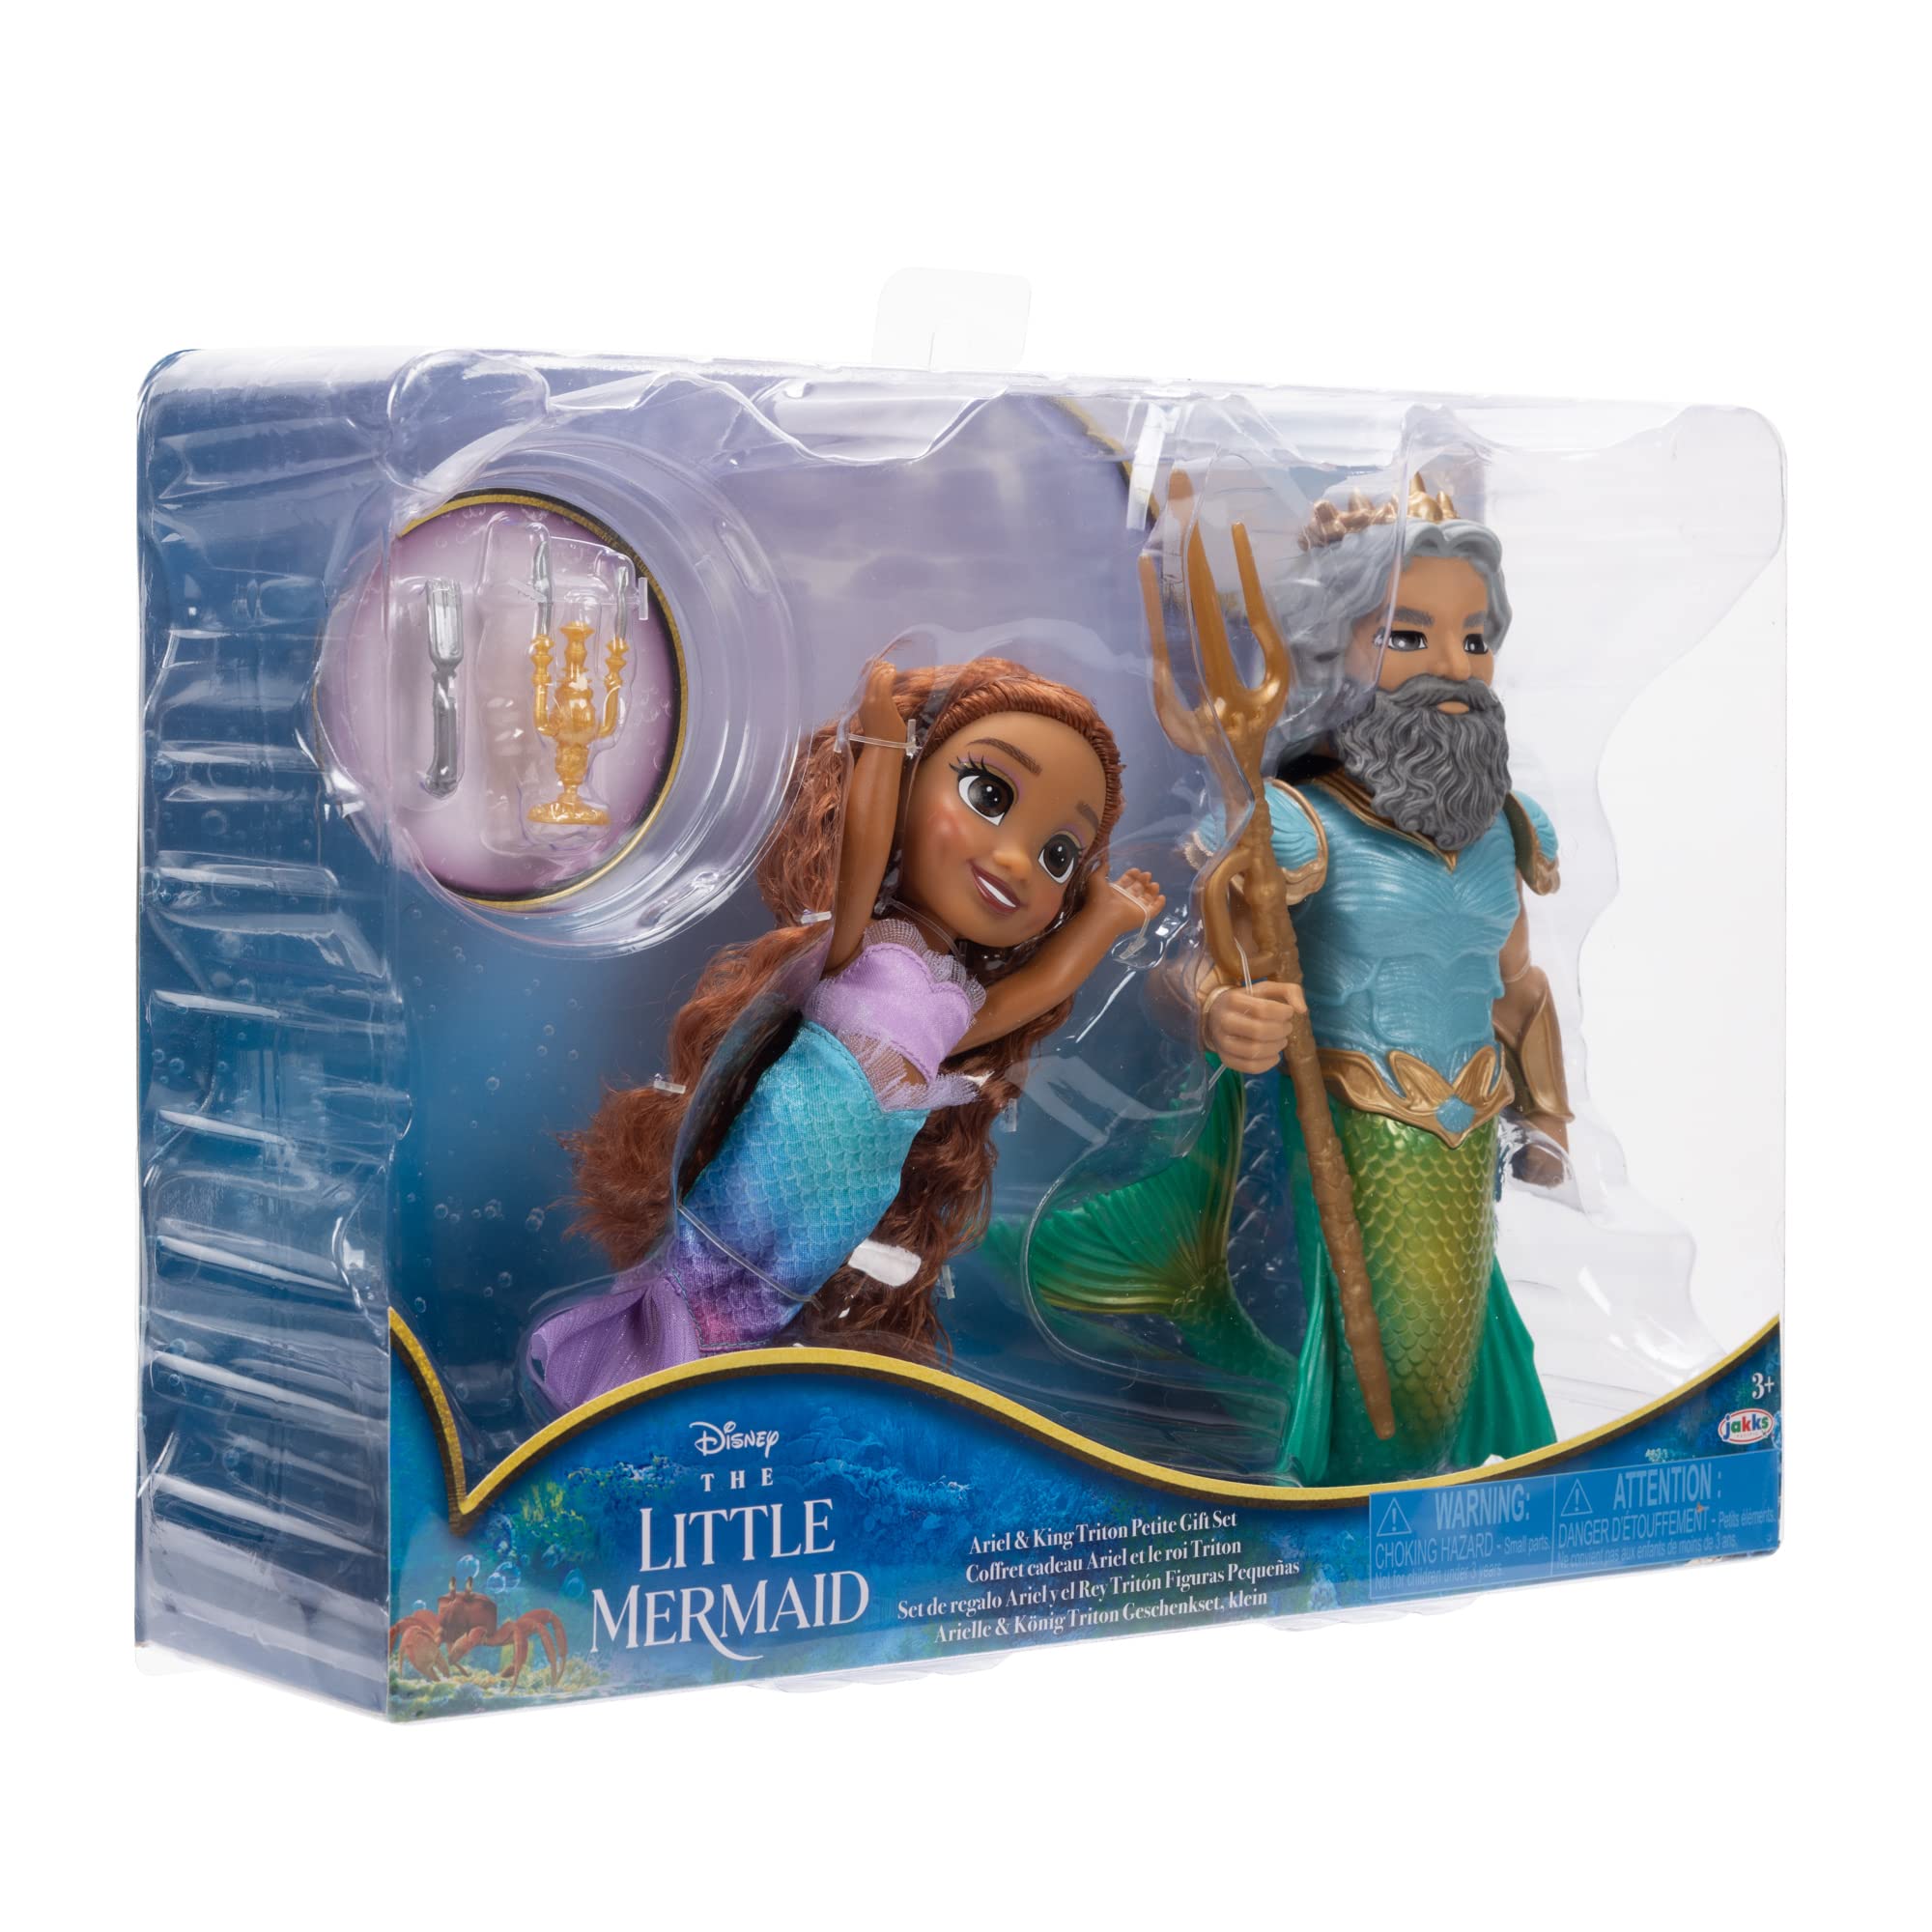 Disney The Little Mermaid Ariel Doll and King Triton Petite Gift Set, 6 Inches Tall with Dinglehopper, Candelabra and King Triton’s Trident Accessory Toys